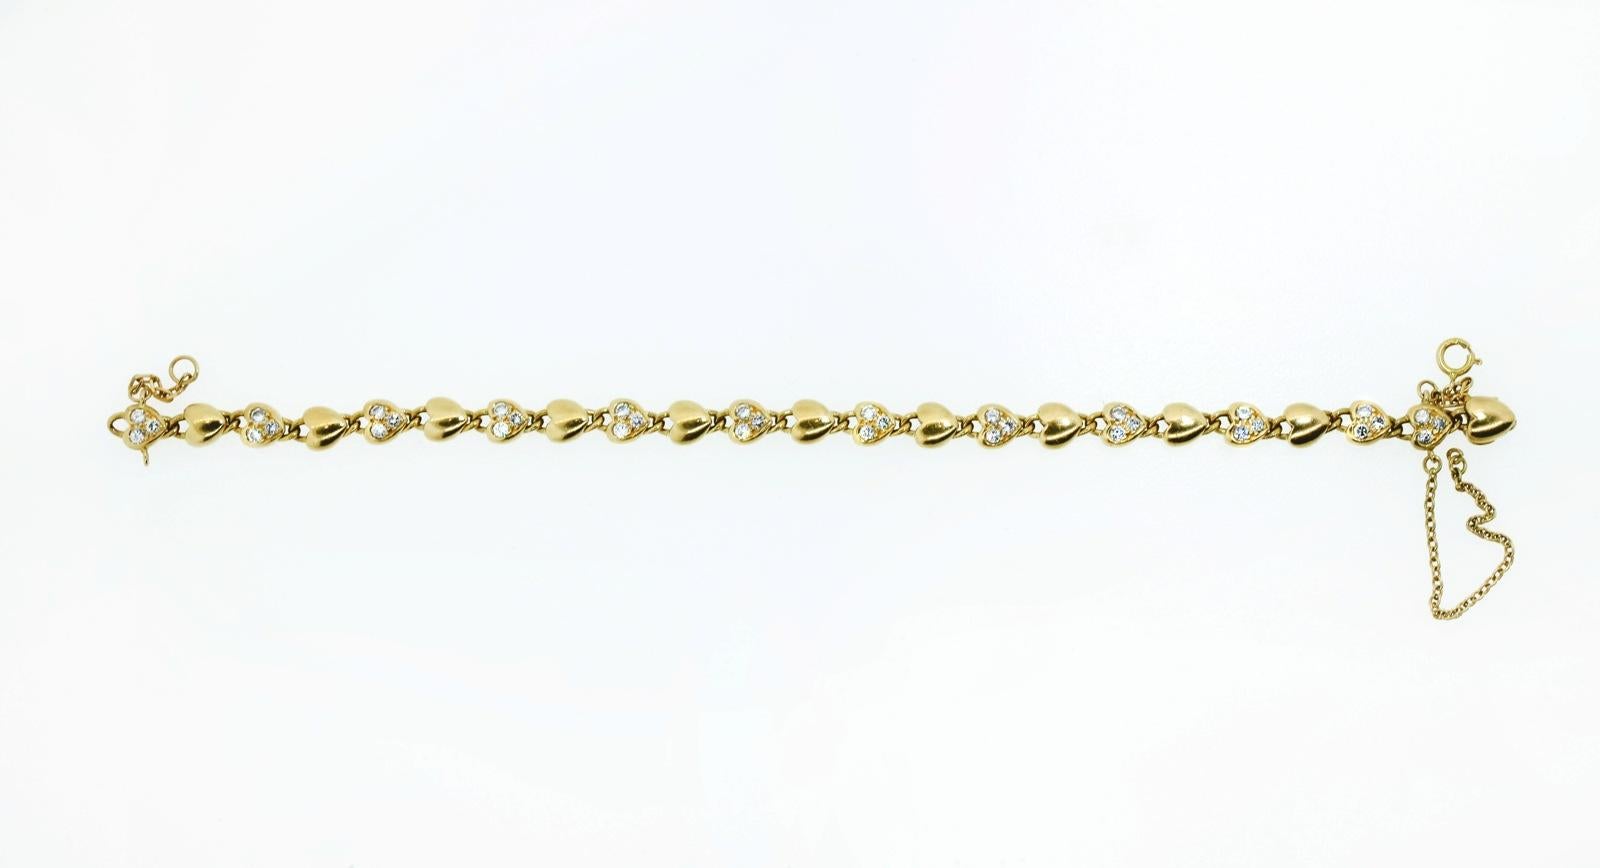 Cartier 18KT yellow gold alternating diamond heart links bracelet.  Set with thirty six Round Brilliant Cut Diamonds weighing approx. 1.08 carats of G-H color - VS clarity.  The 7 inch long bracelet is completed with an invisible clasp and two